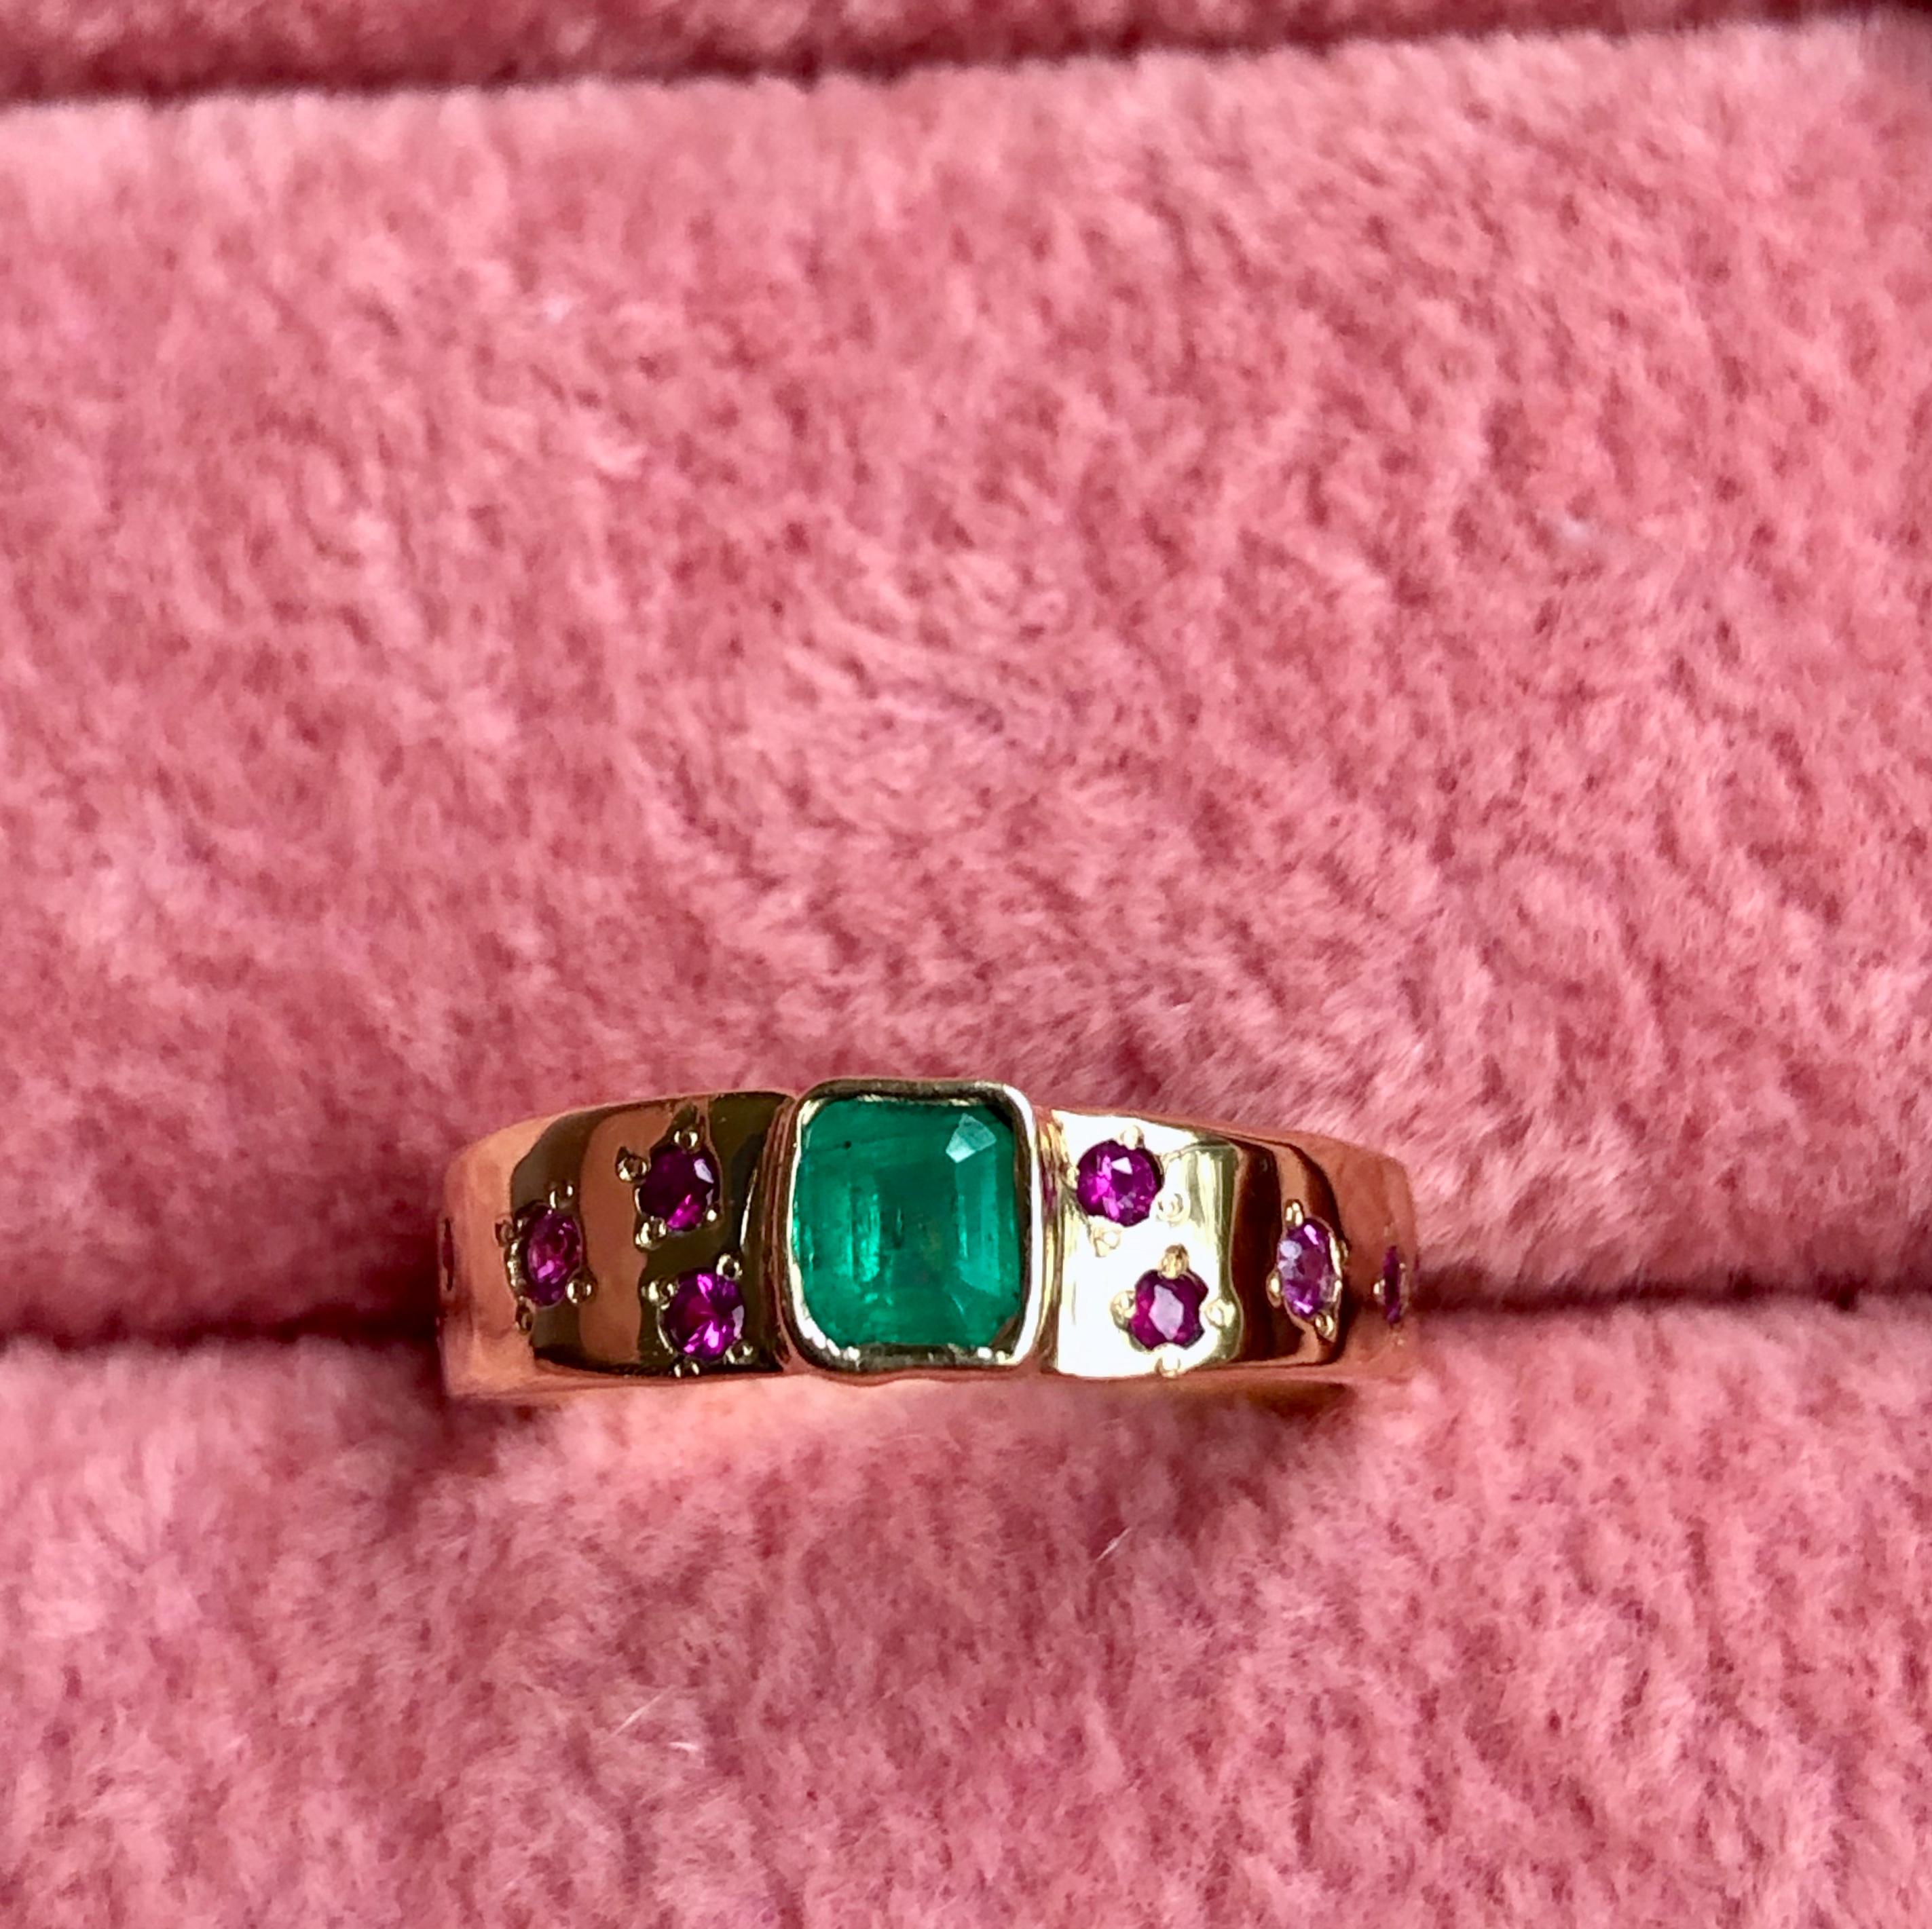 Finely detailed and perfectly imperfect, this one-of-a-kind band is exquisite, yet simple, combination of vibrant Colombian emerald and rubies rich 18K pinkish-yellow gold. Celebrate an anniversary or represent a commitment with this ring on your